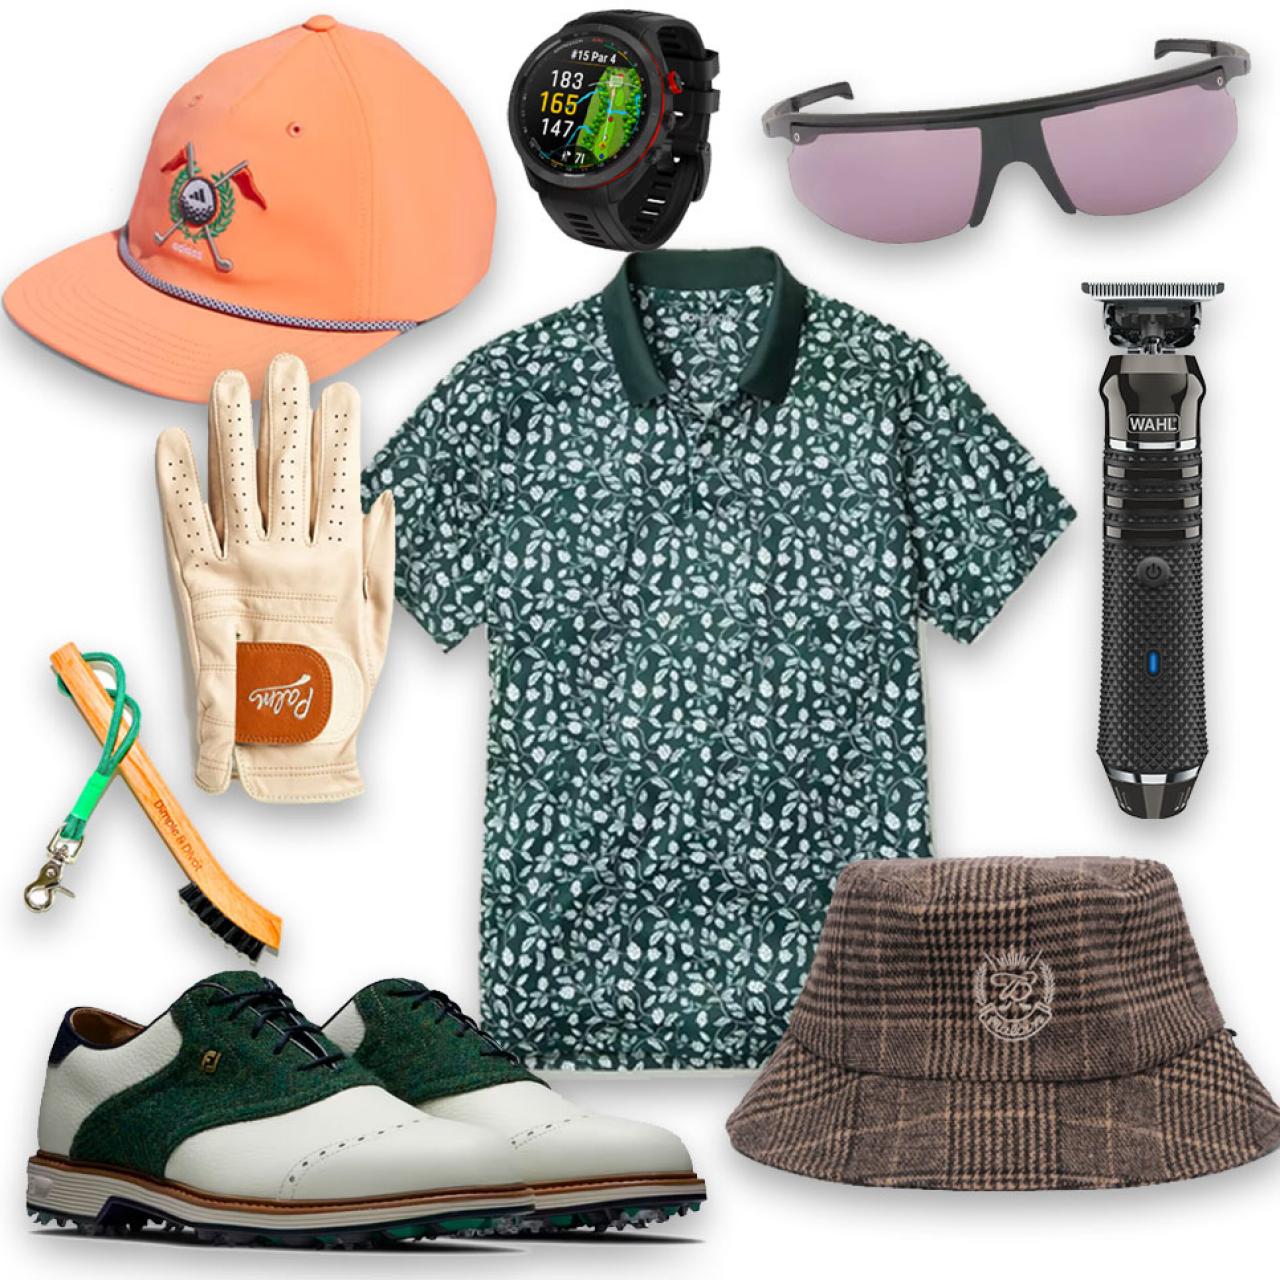 https://golfdigest.sports.sndimg.com/content/dam/images/golfdigest/products/2023/11/9/20231109-Gifts-golfers-Have-Everything.jpg.rend.hgtvcom.1280.1280.suffix/1699581462682.jpeg